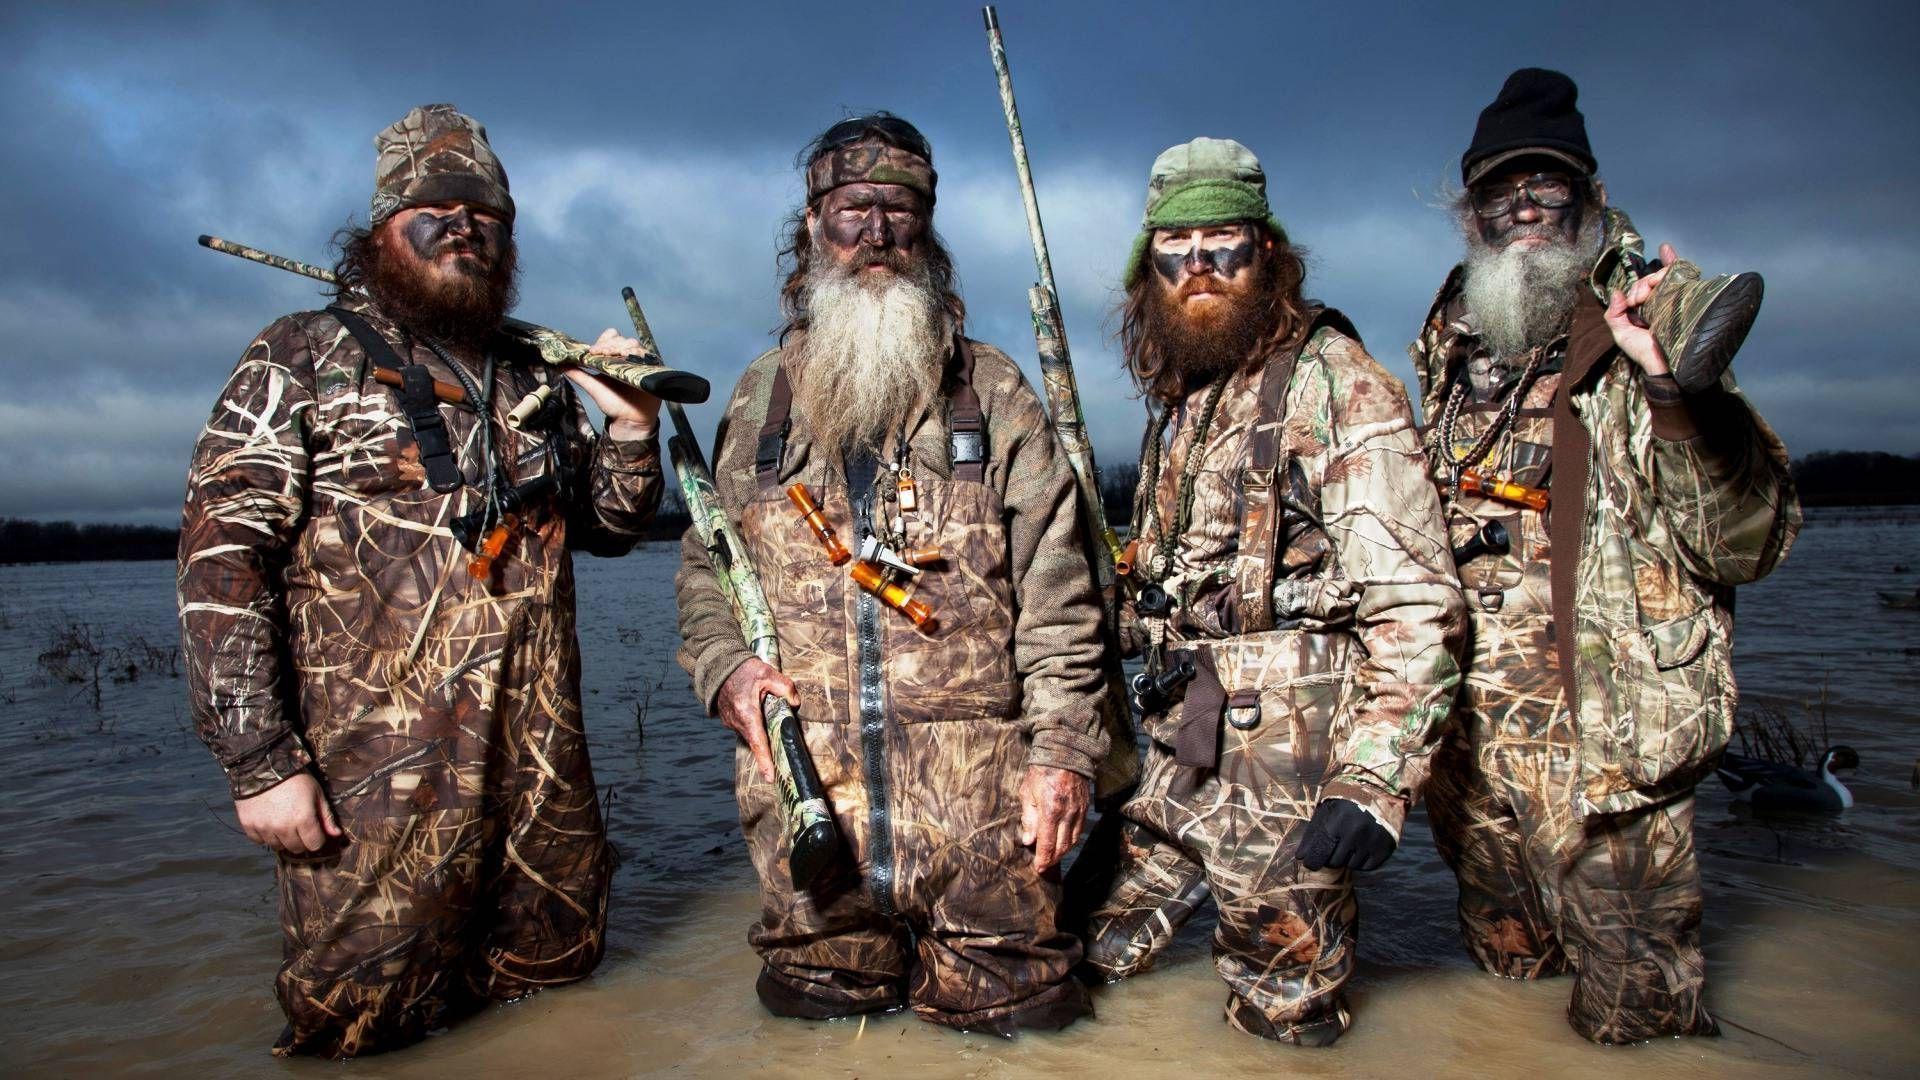 Best 52+ Duck Dynasty Backgrounds on HipWallpapers.